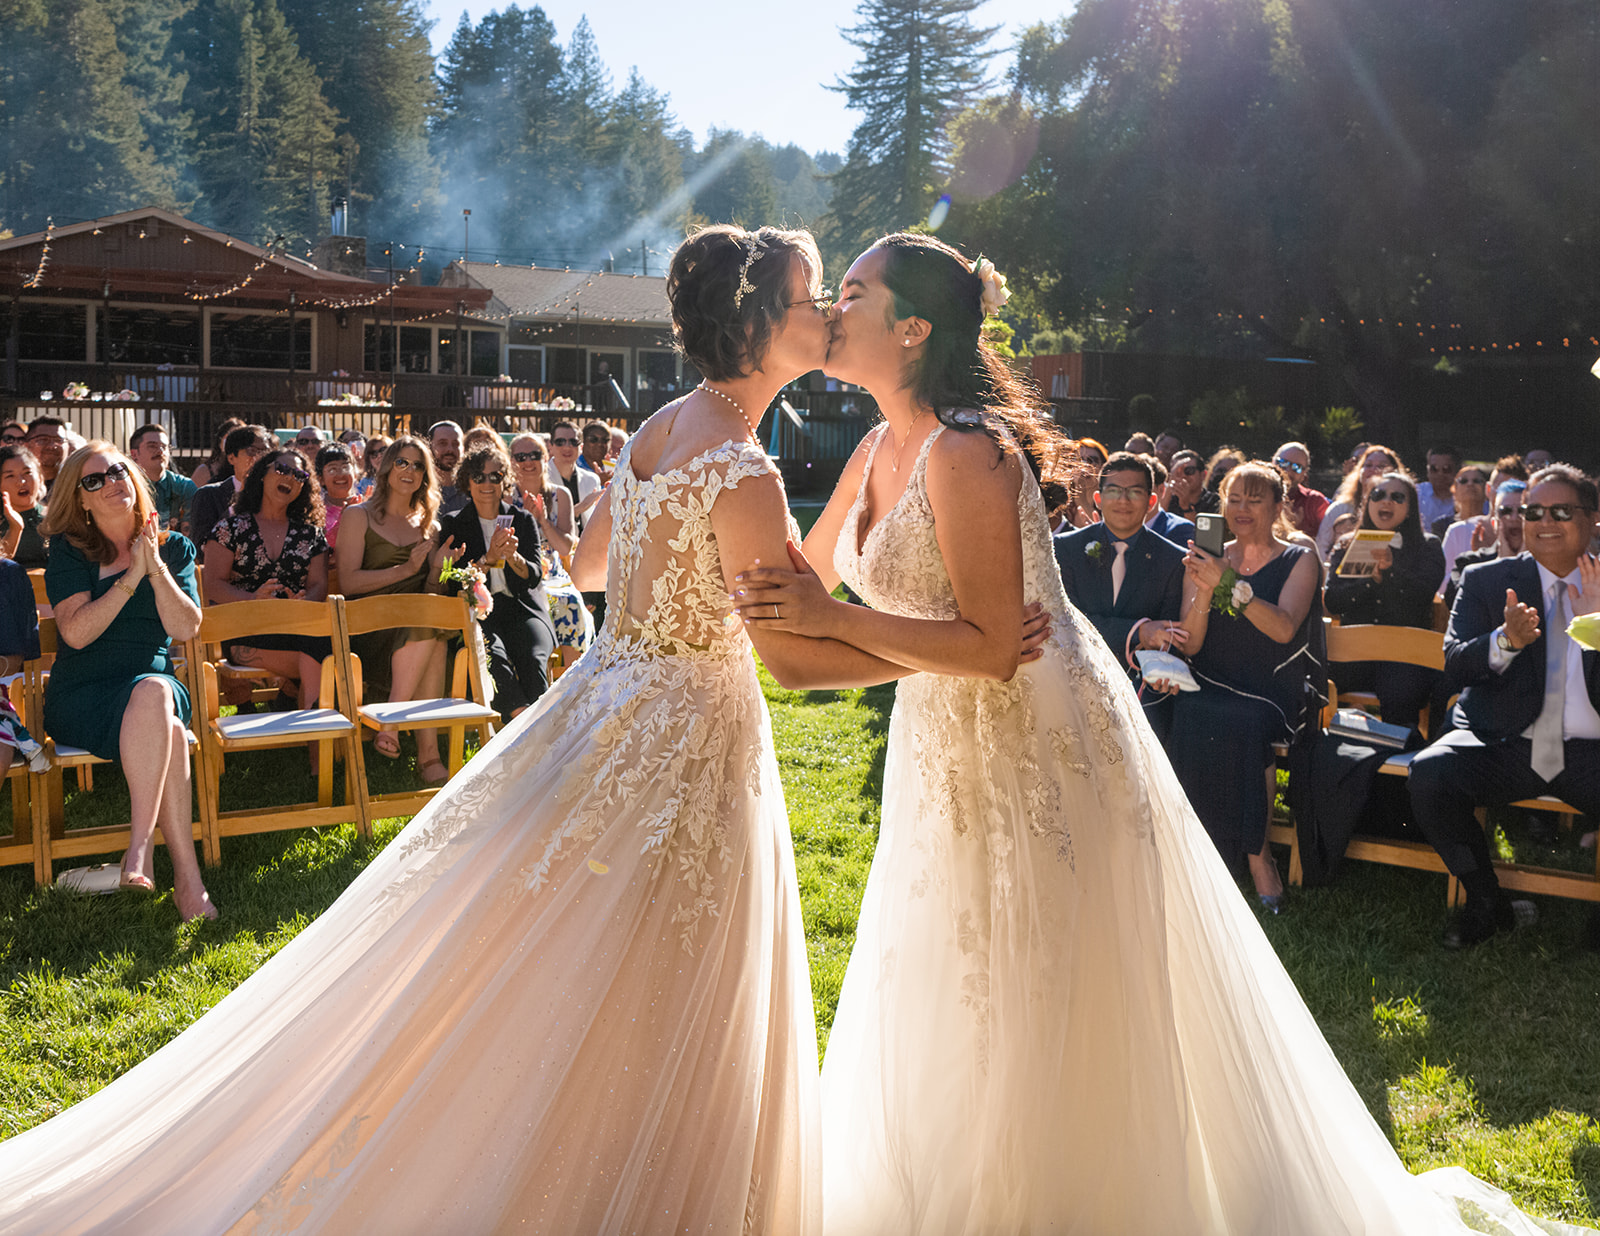 two brides share their first kiss as wives in a reverse first kiss photo